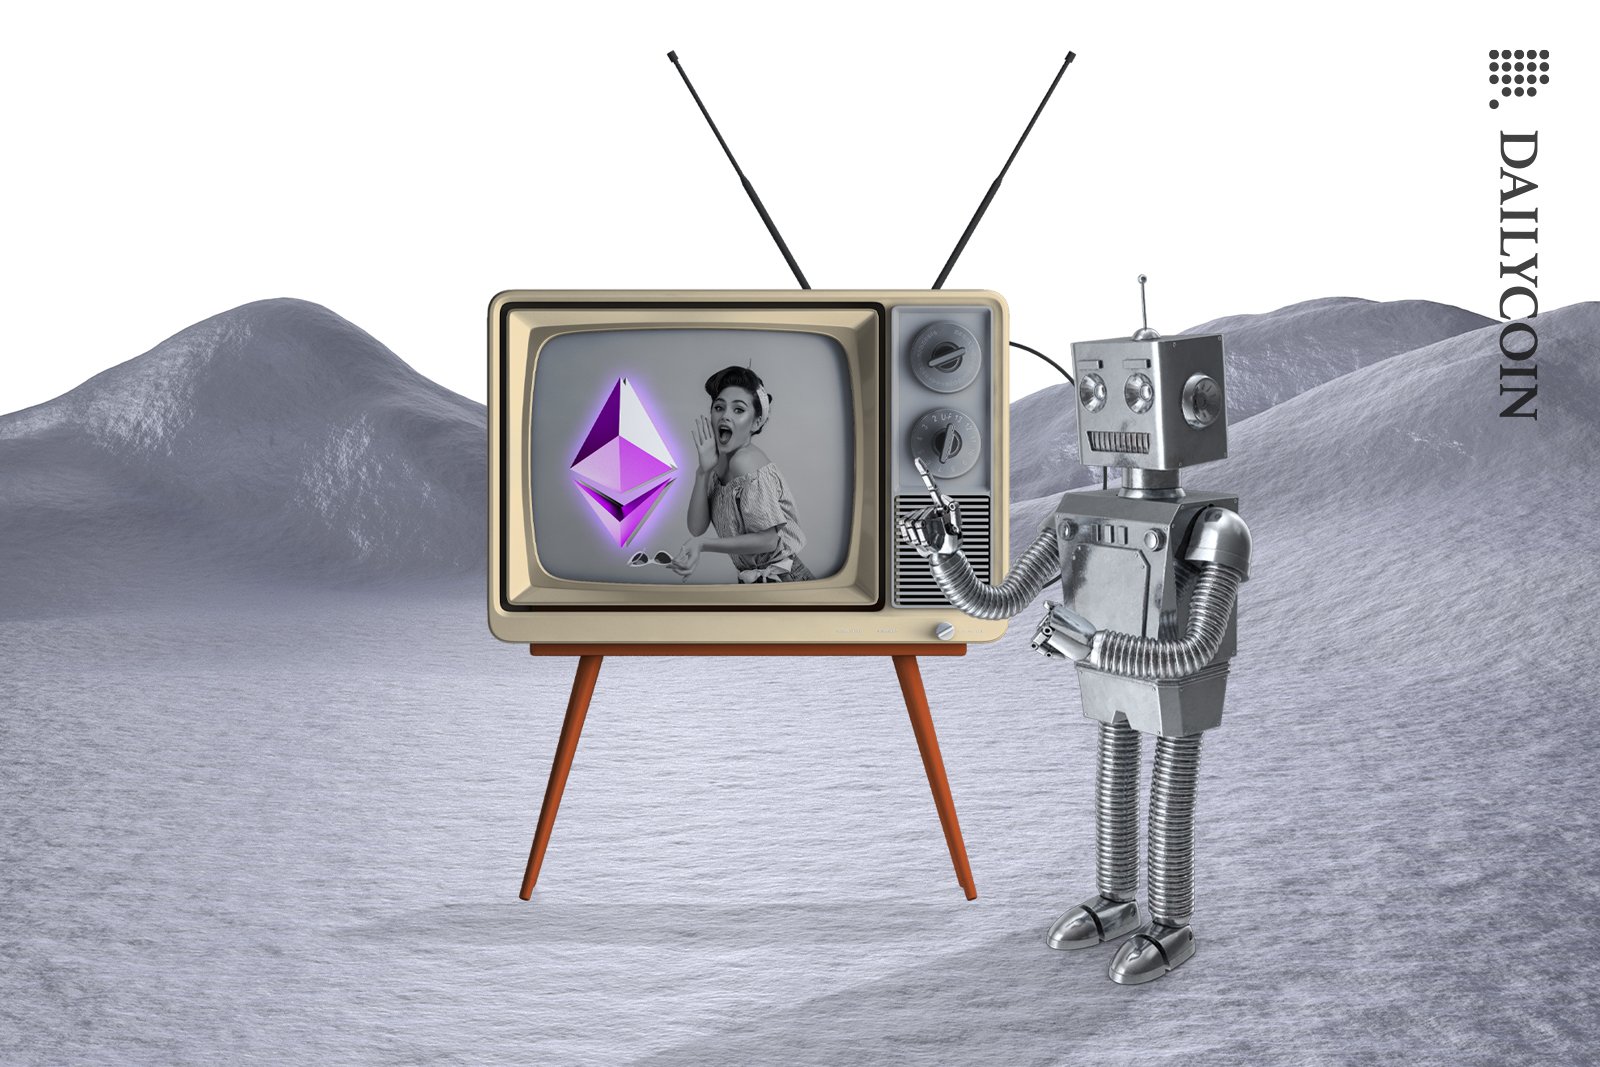 Vintage TV lady impressed by Layer 2 Ethereum, robot is explaining what is going on.